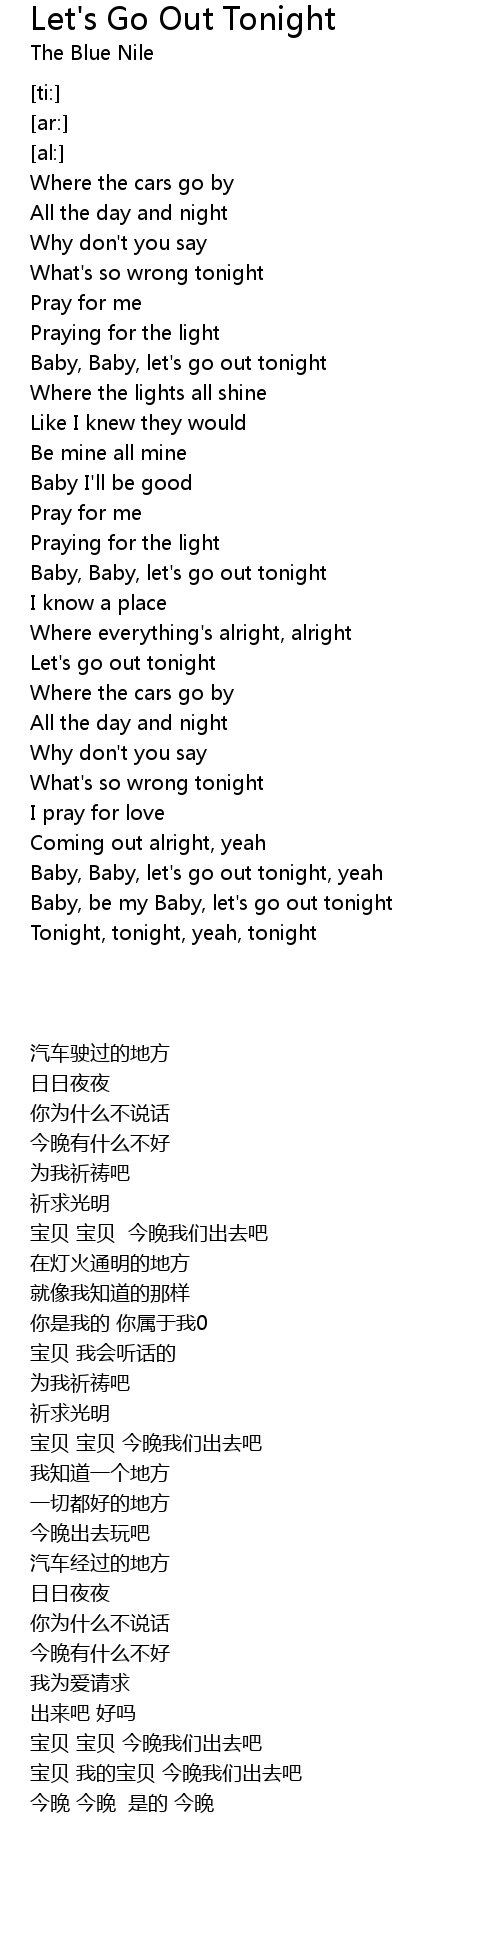 I say baby you can take me out tonight lyrics